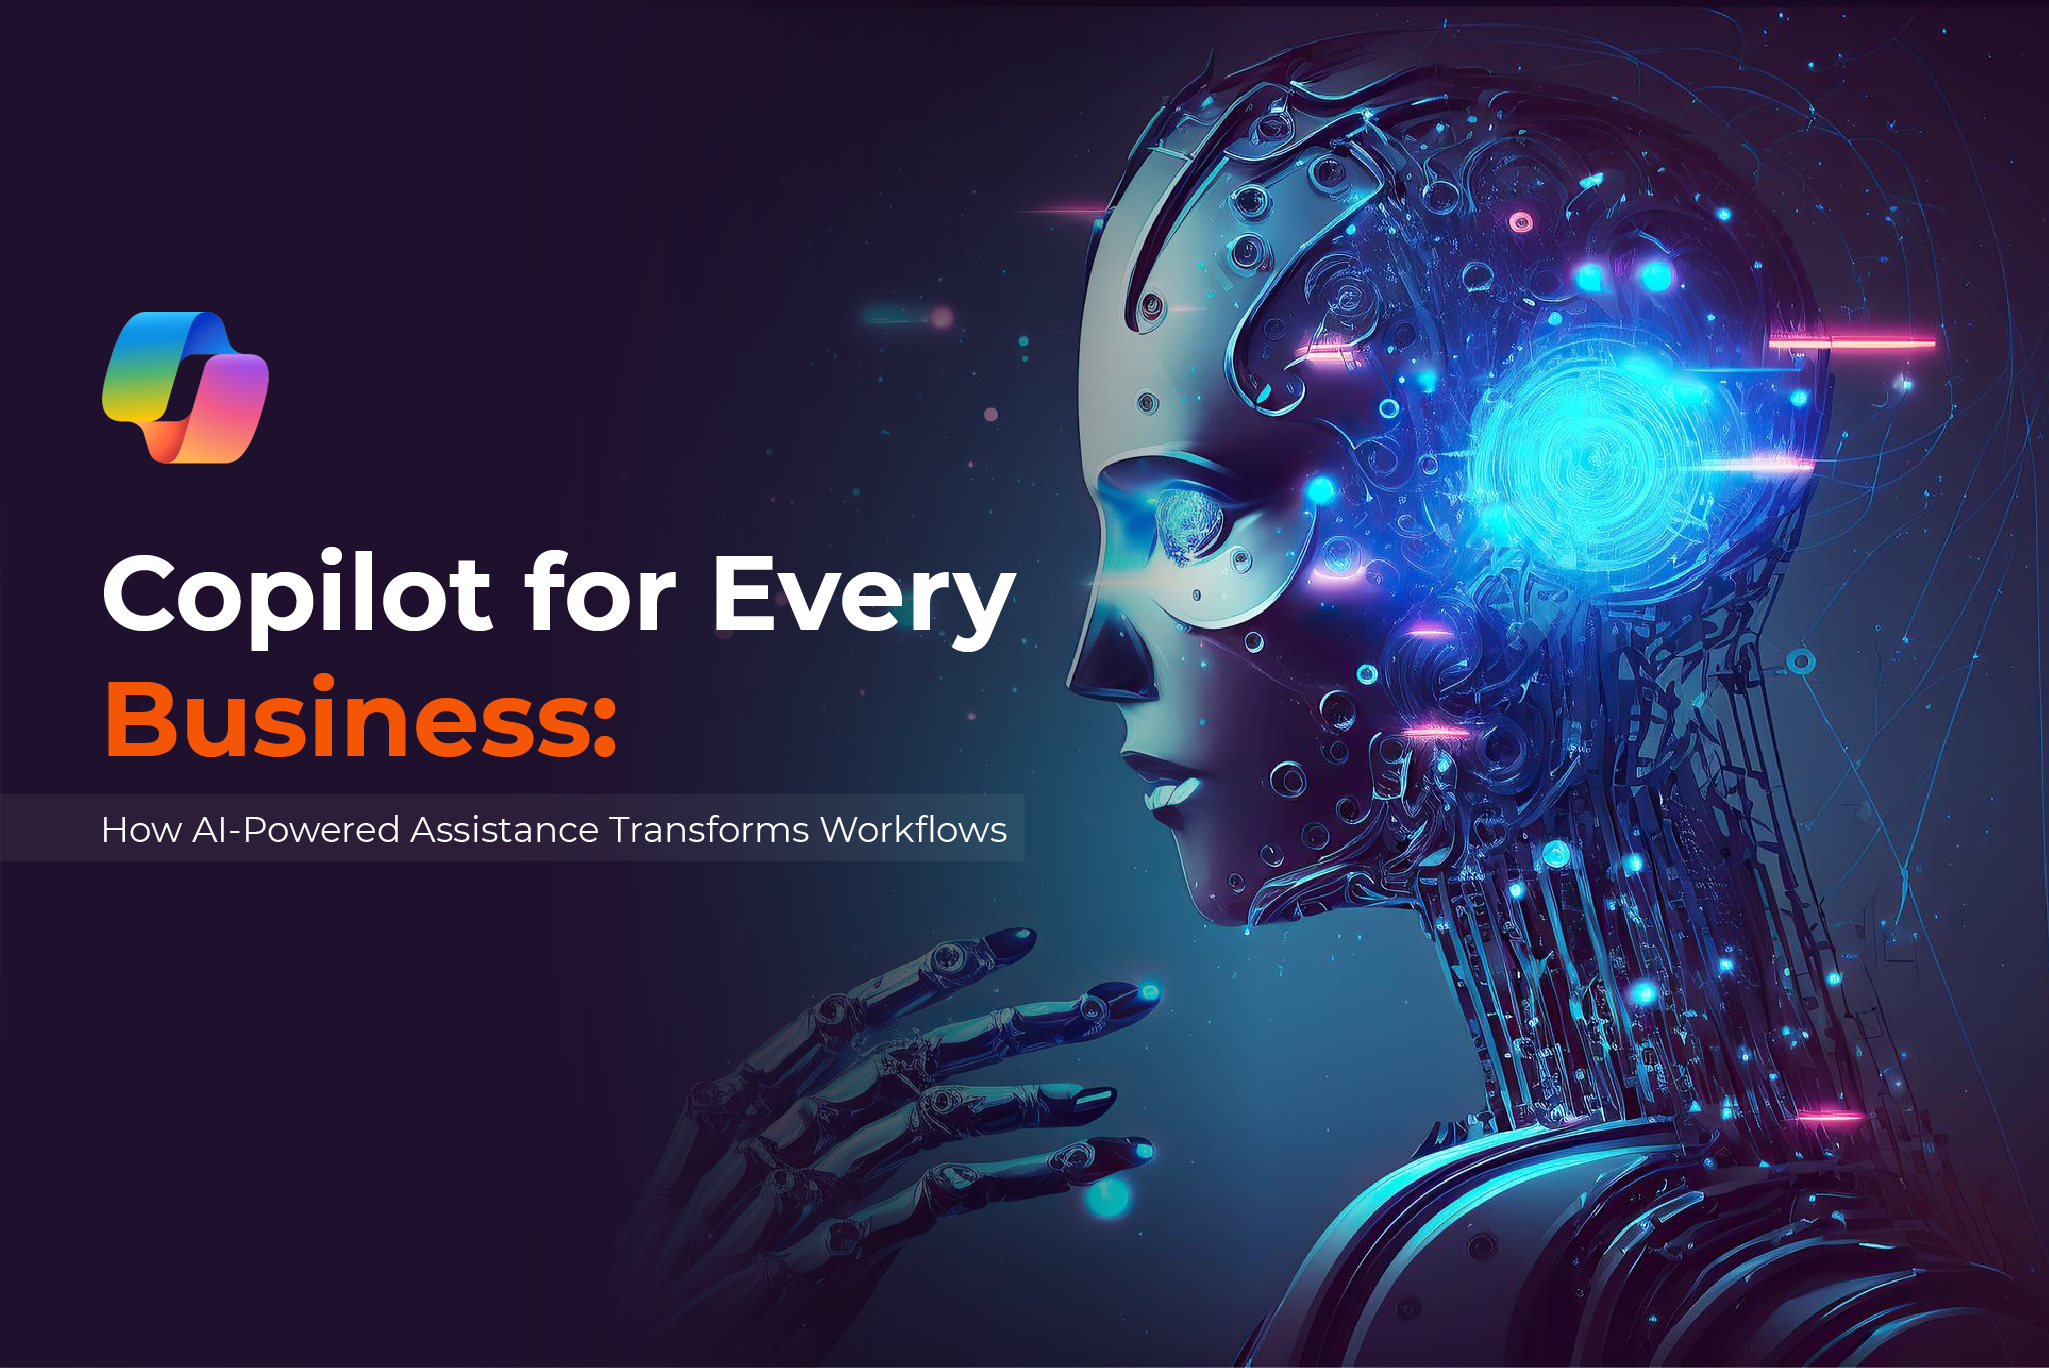 Copilot for Every Business: How AI-Powered Assistance Transforms Workflows